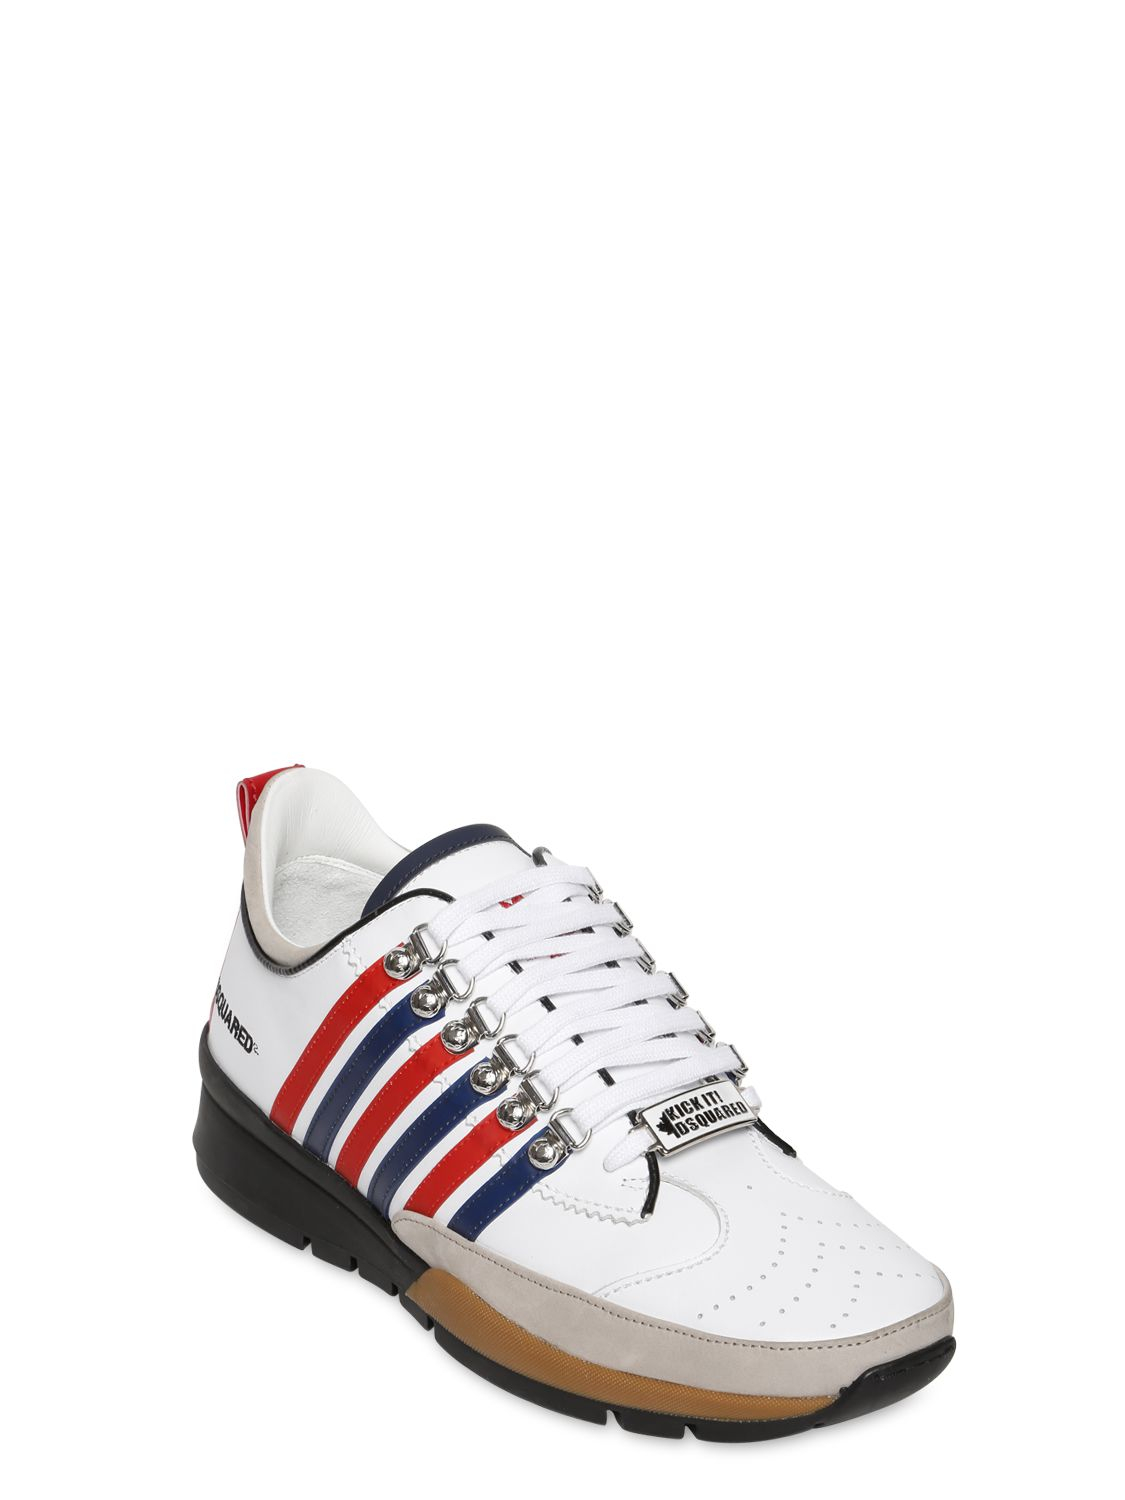 Lyst - Dsquared² Striped Leather & Suede Sneakers in White for Men1125 x 1500